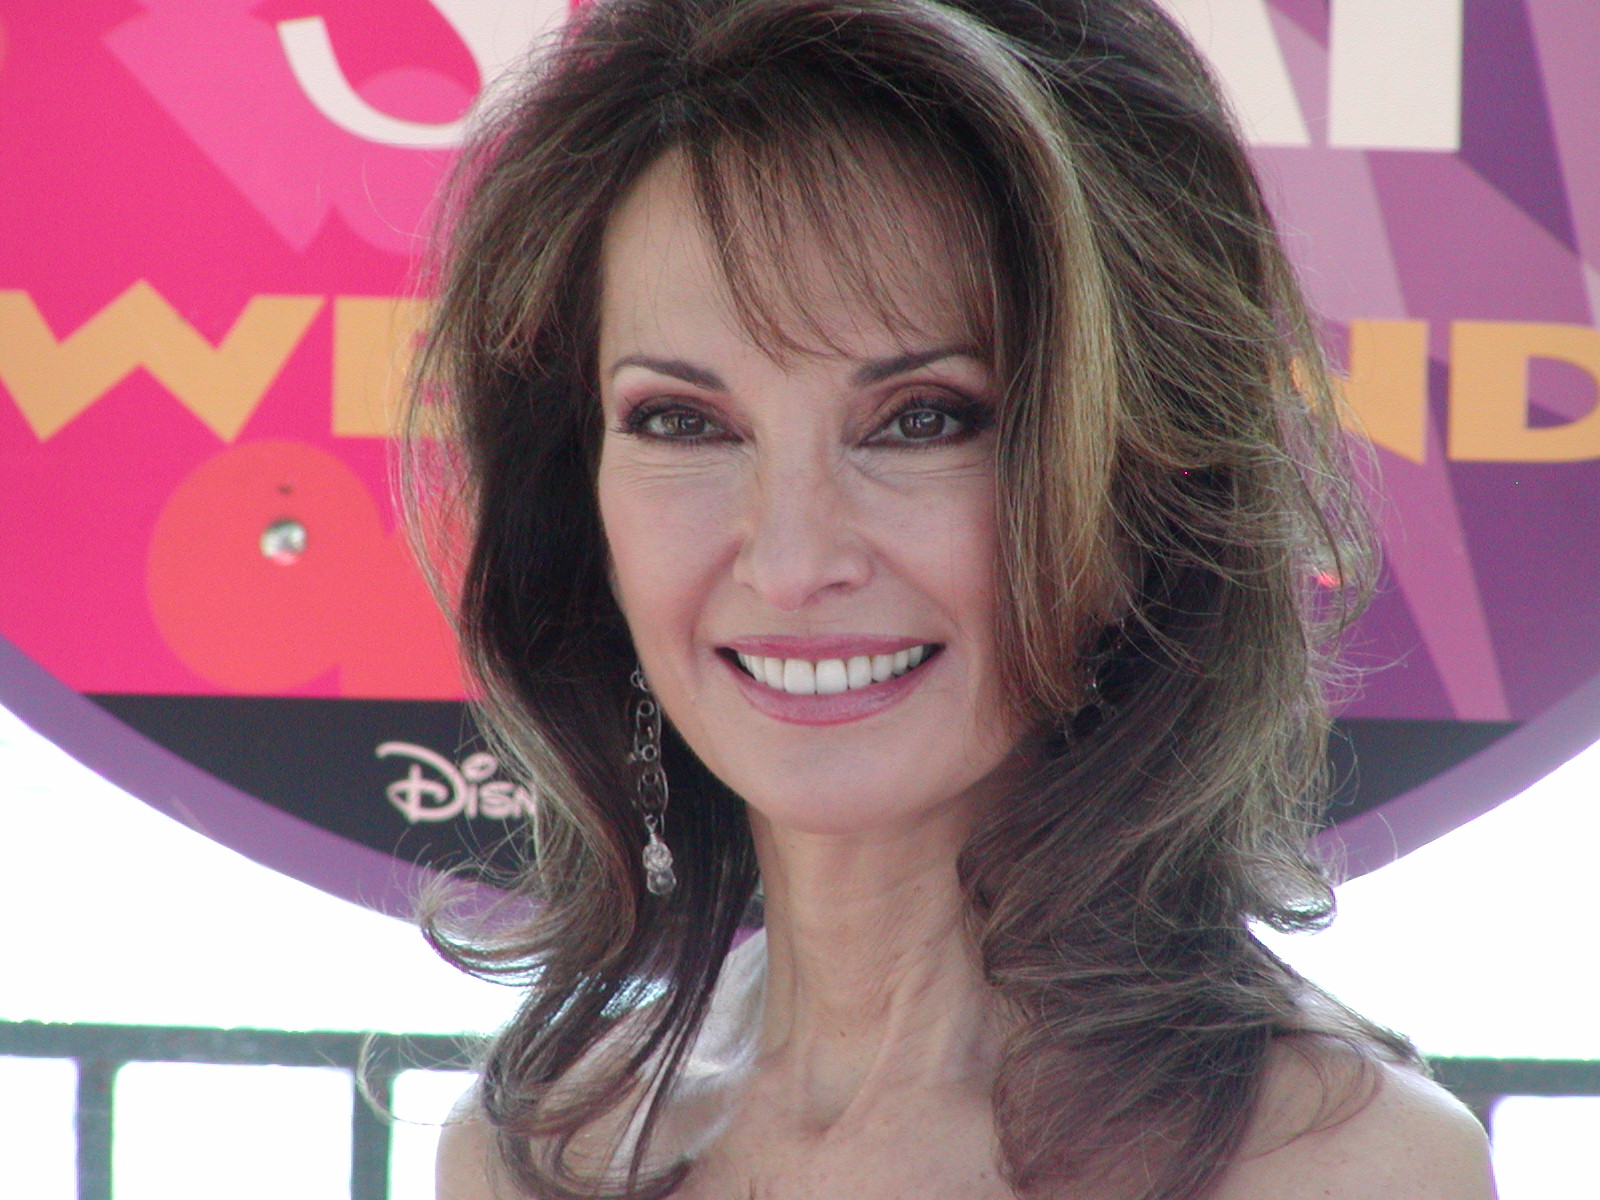 How Rich is Susan Lucci?